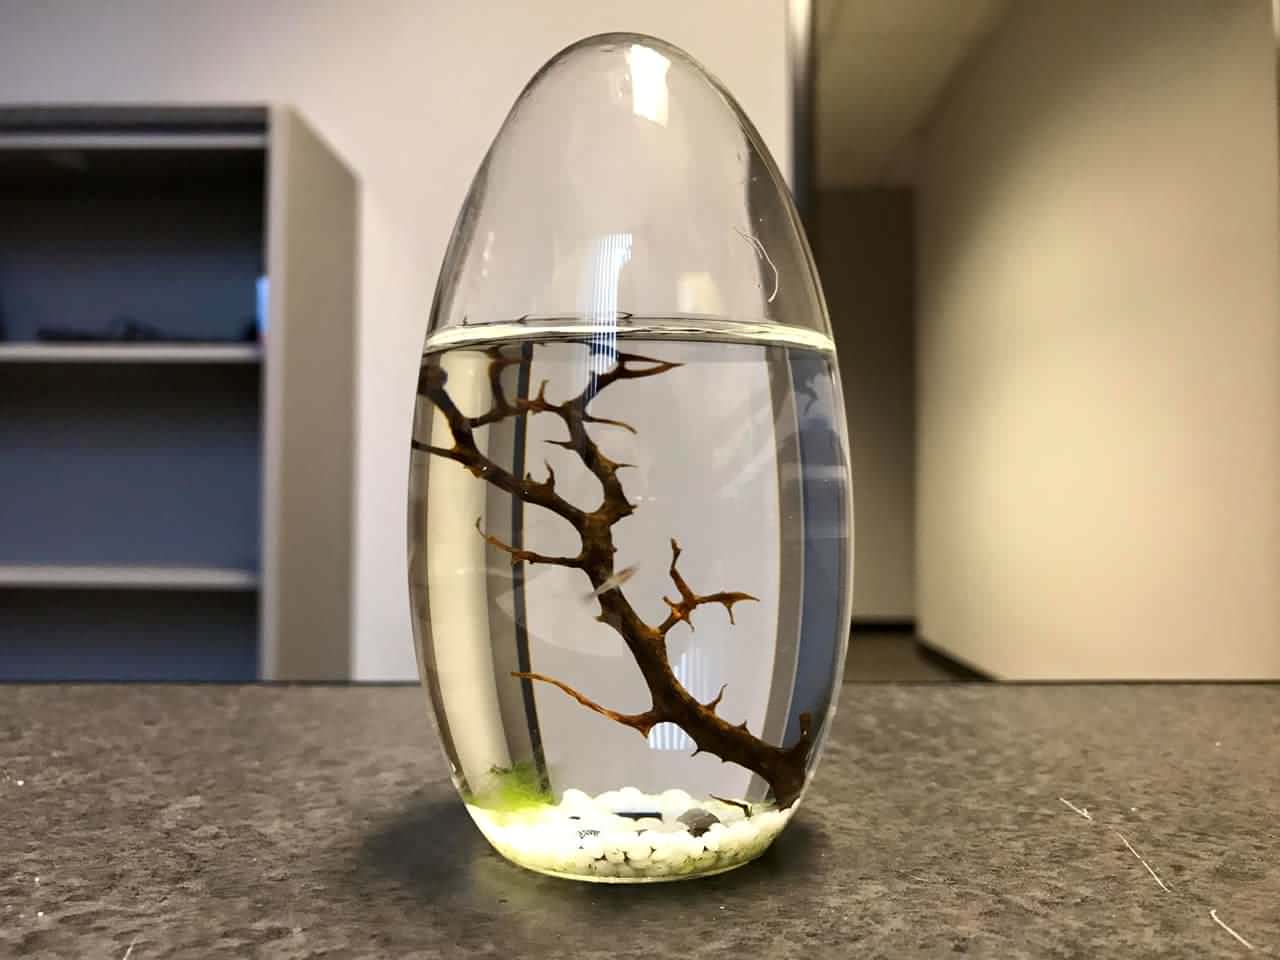 Meme of small tree growing in water egg